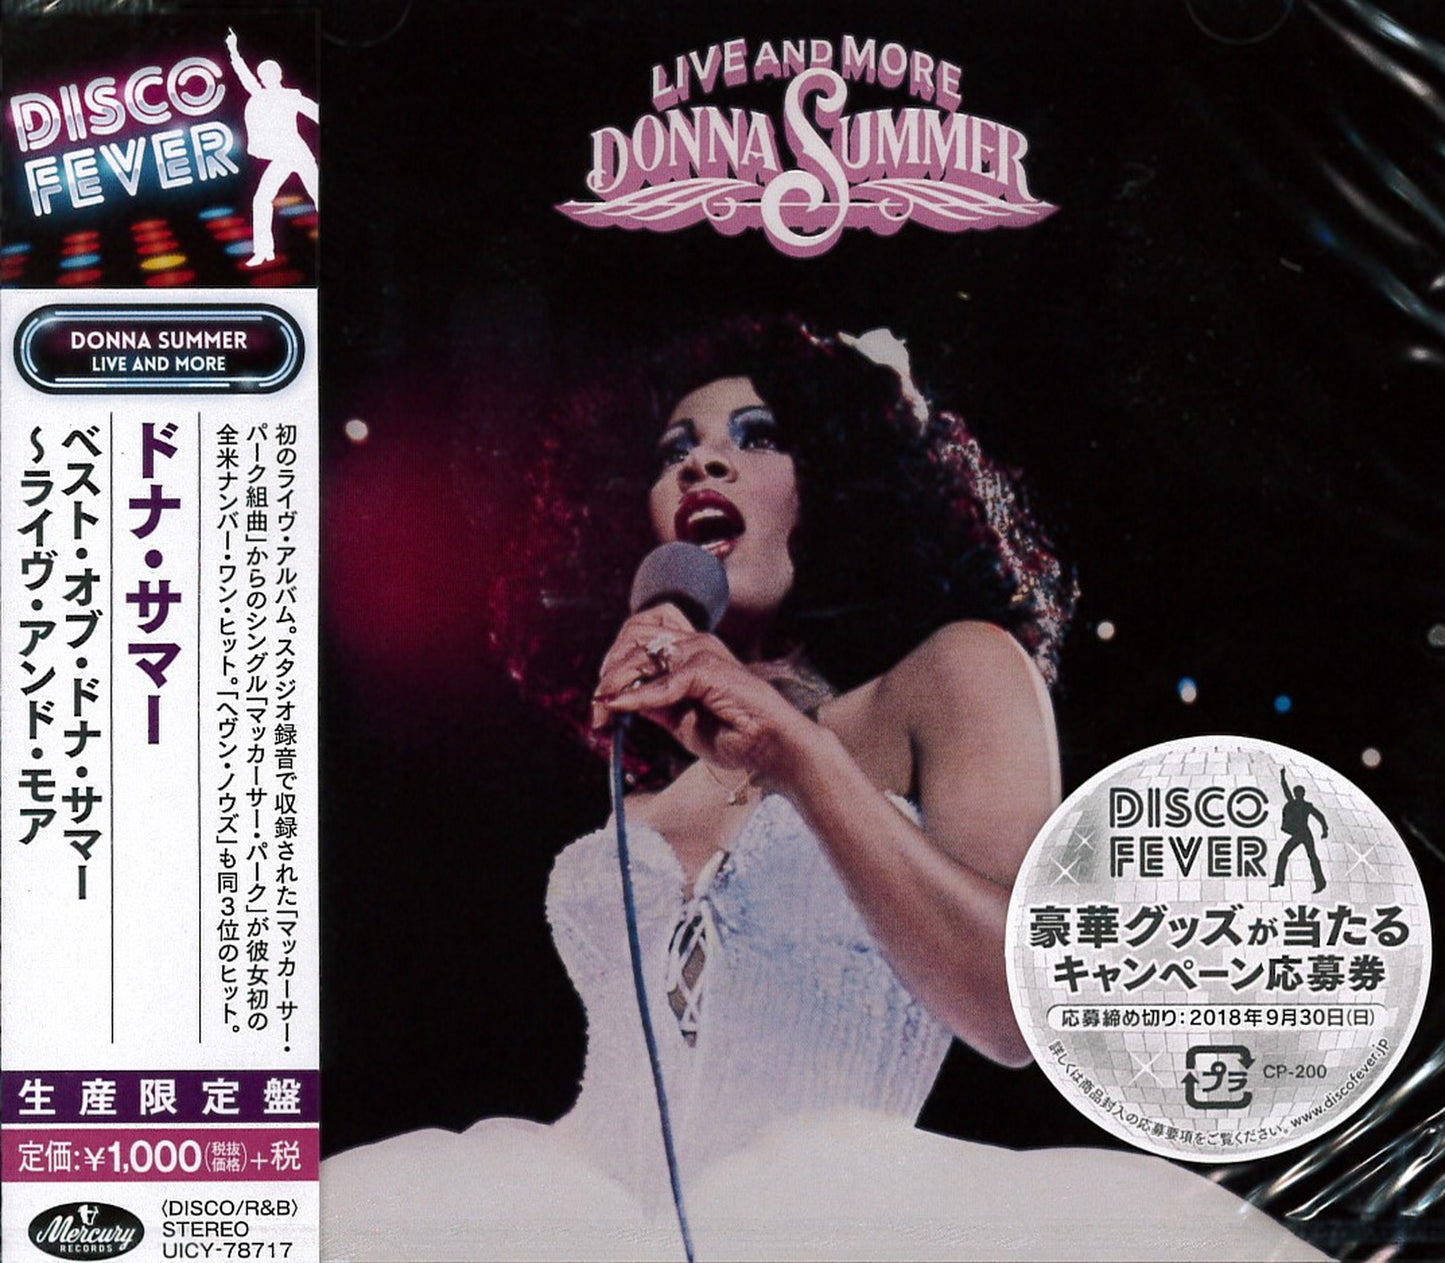 Donna Summer - Live And More - Japan  CD Limited Edition